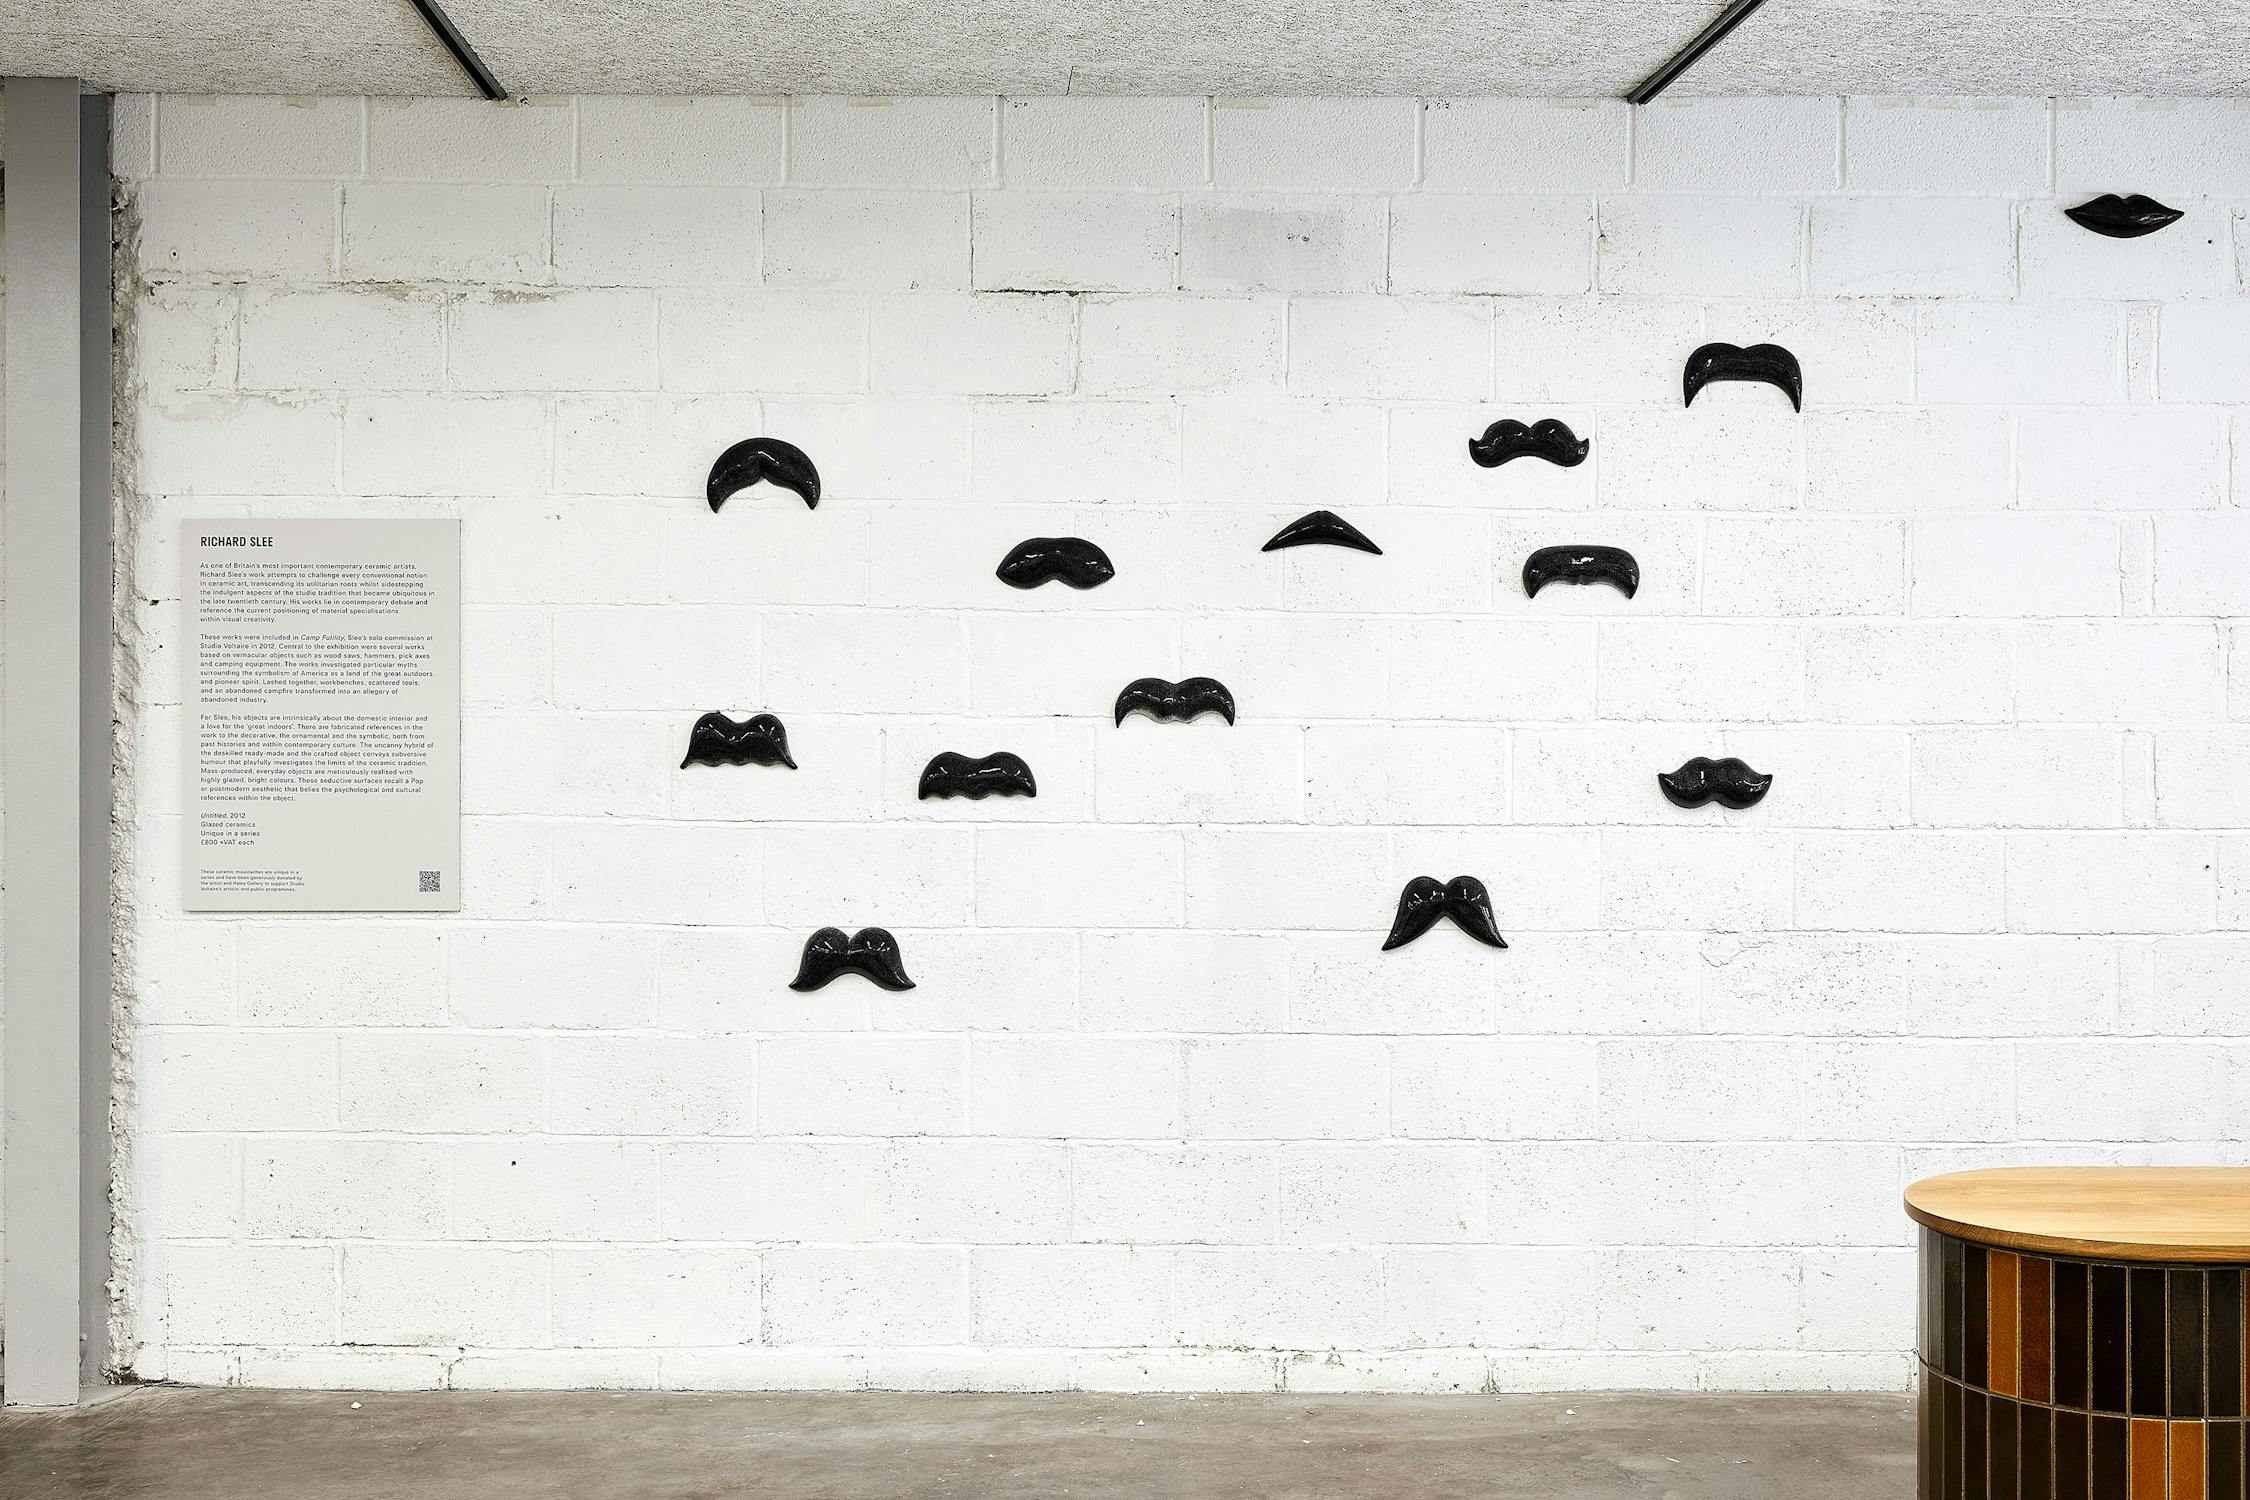 a photograph of an installation of sculptures that resemble moustaches. They are glazed in grey and are arranged on a wall. In the foreground there is a round table with tiled base.